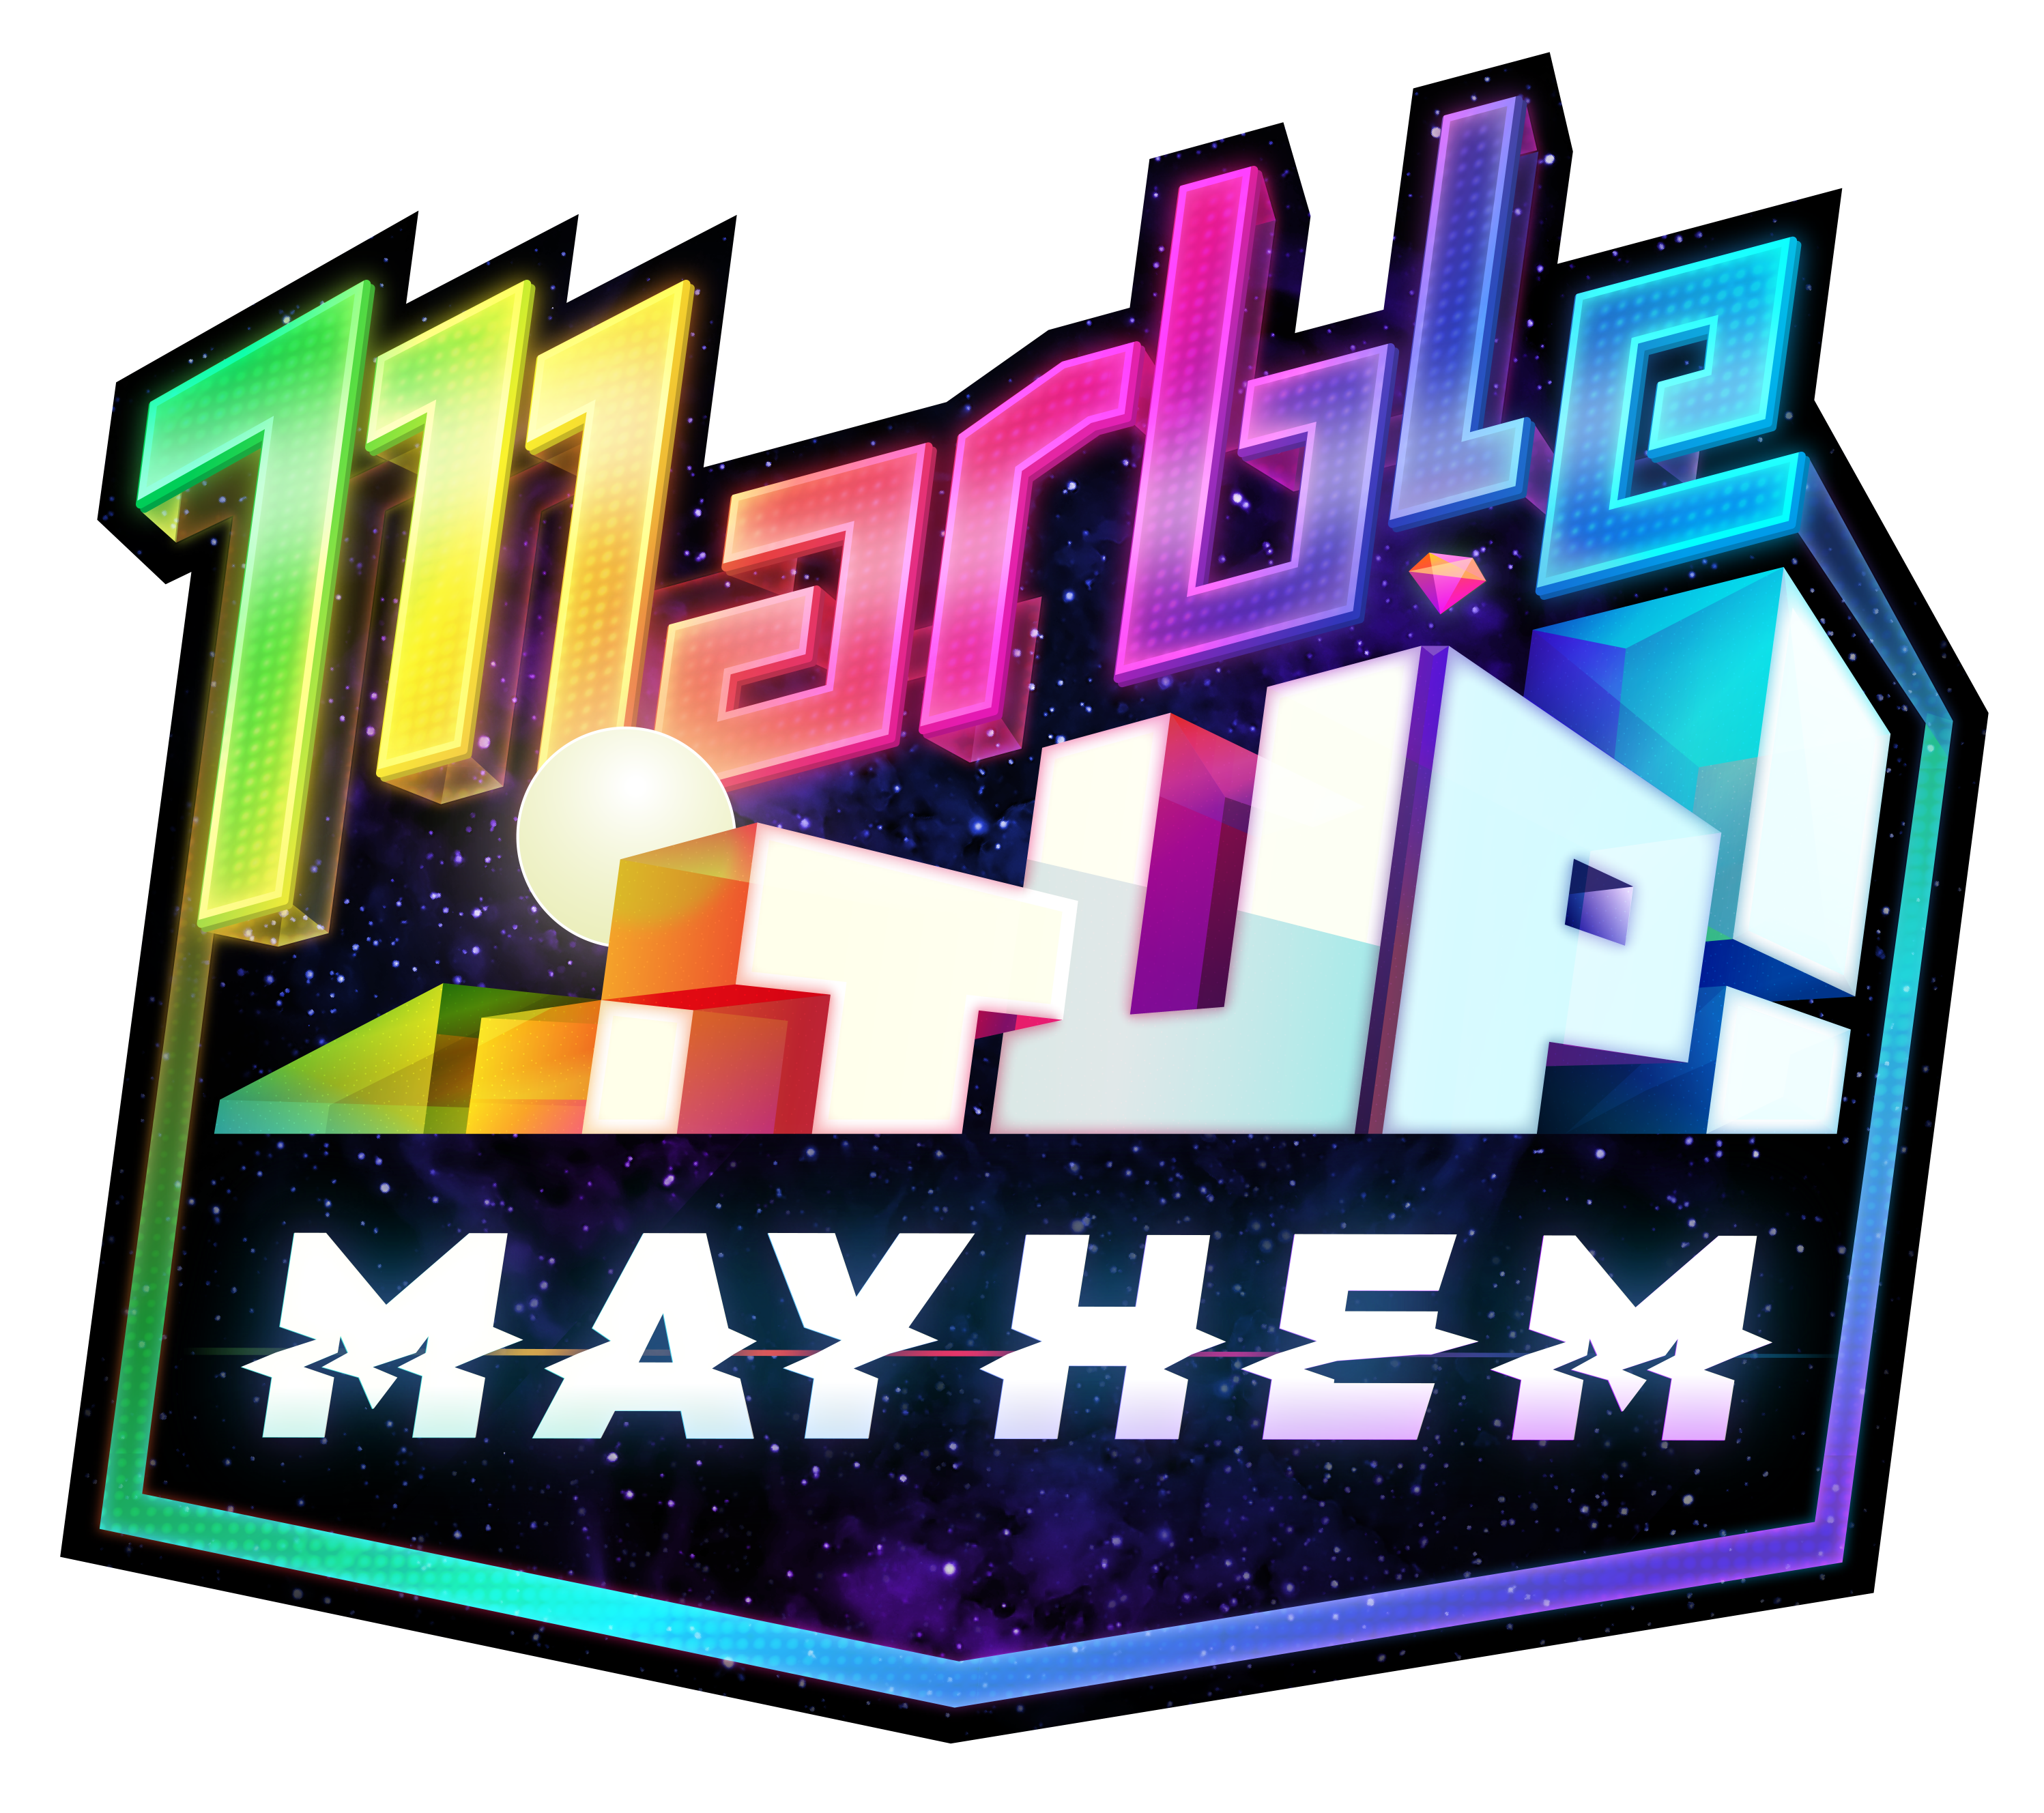 marble it up icon switch